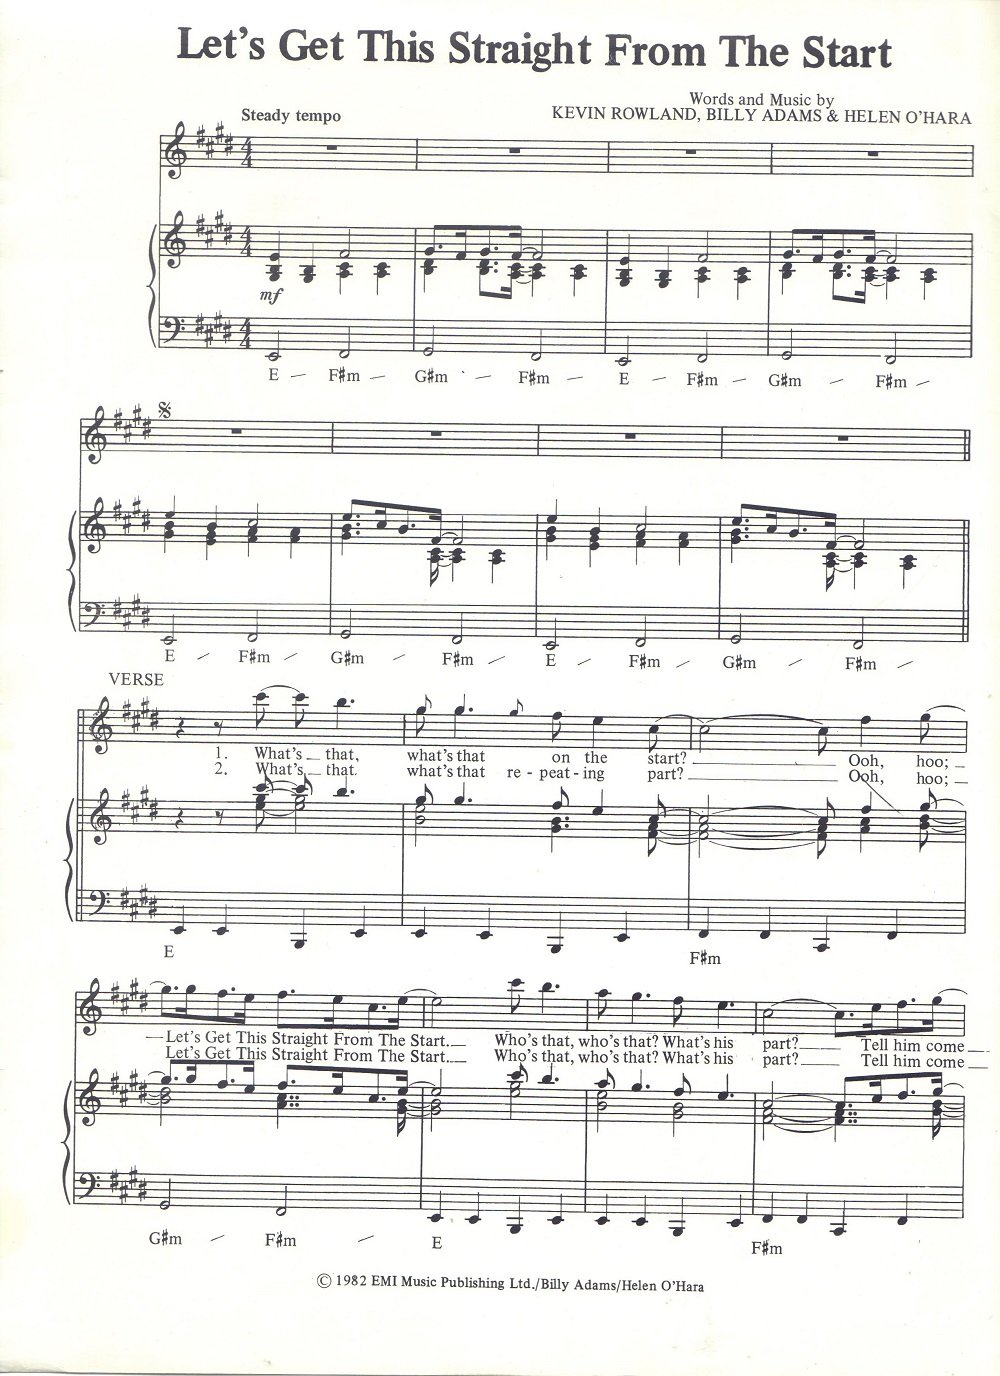 Lets_Get_This_Straight_Sheet_Music_2.jpg